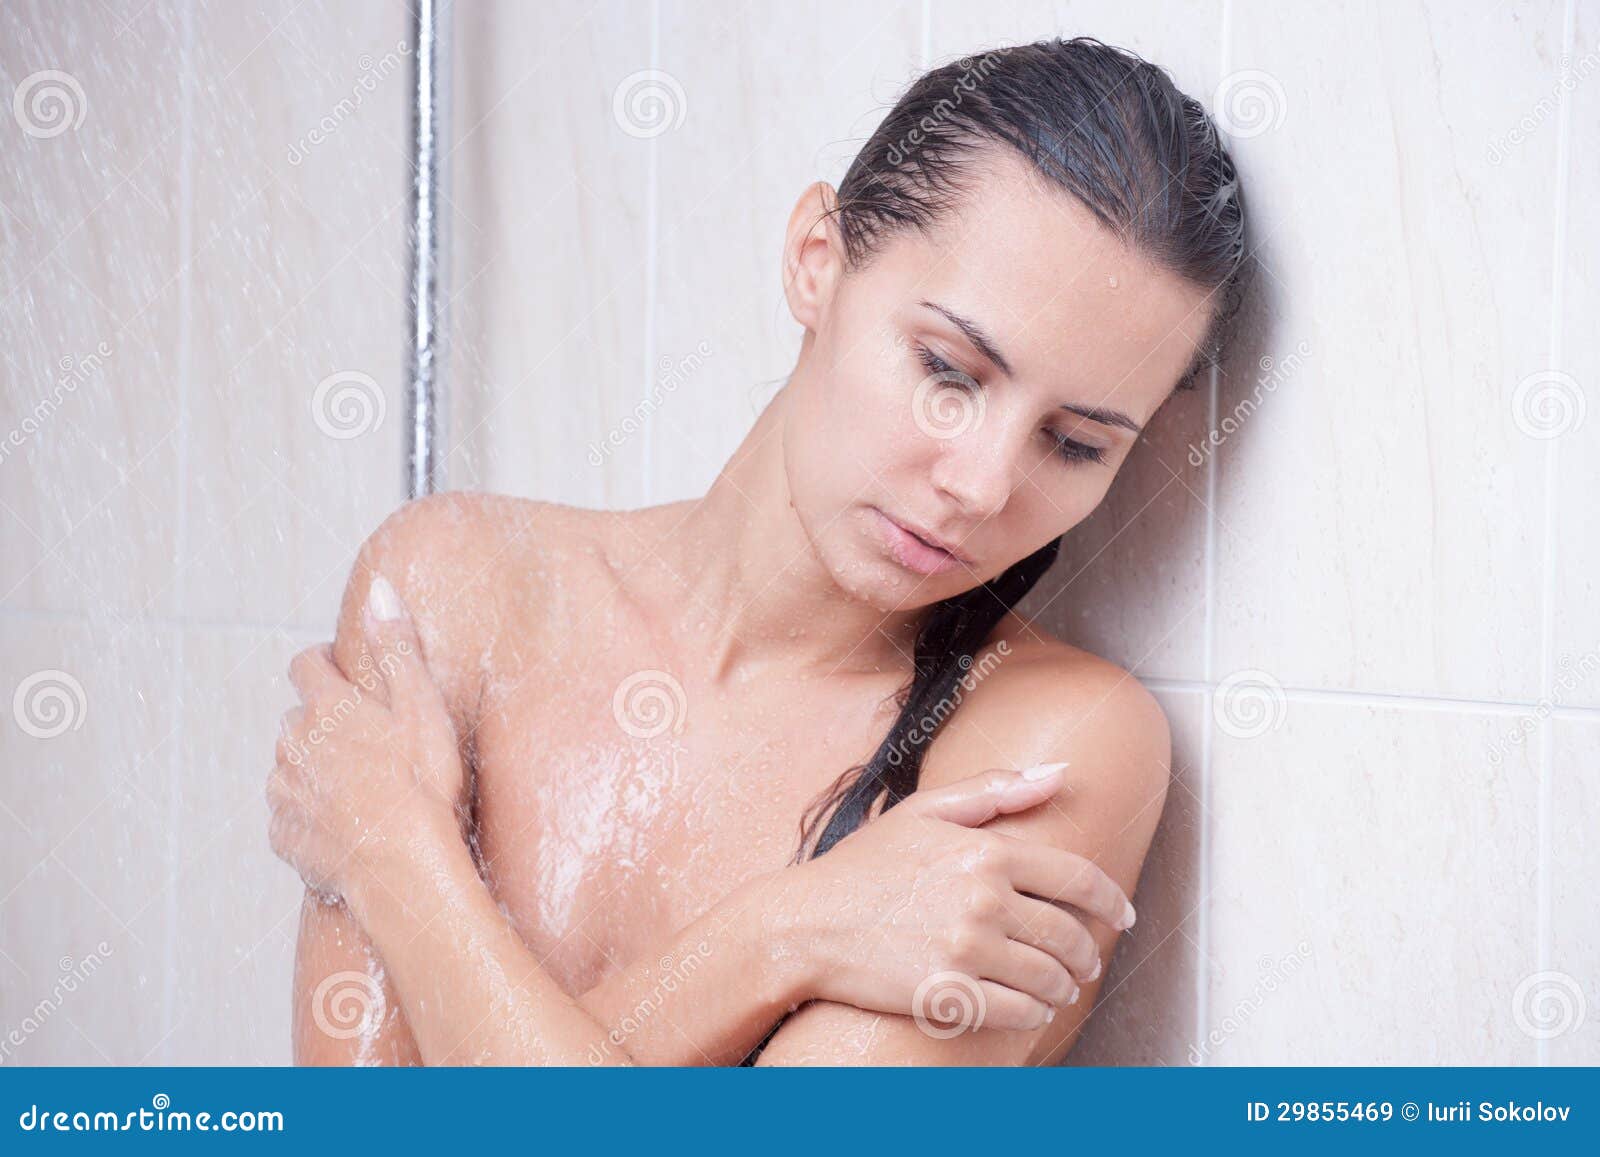 disappointed girl in shower stock